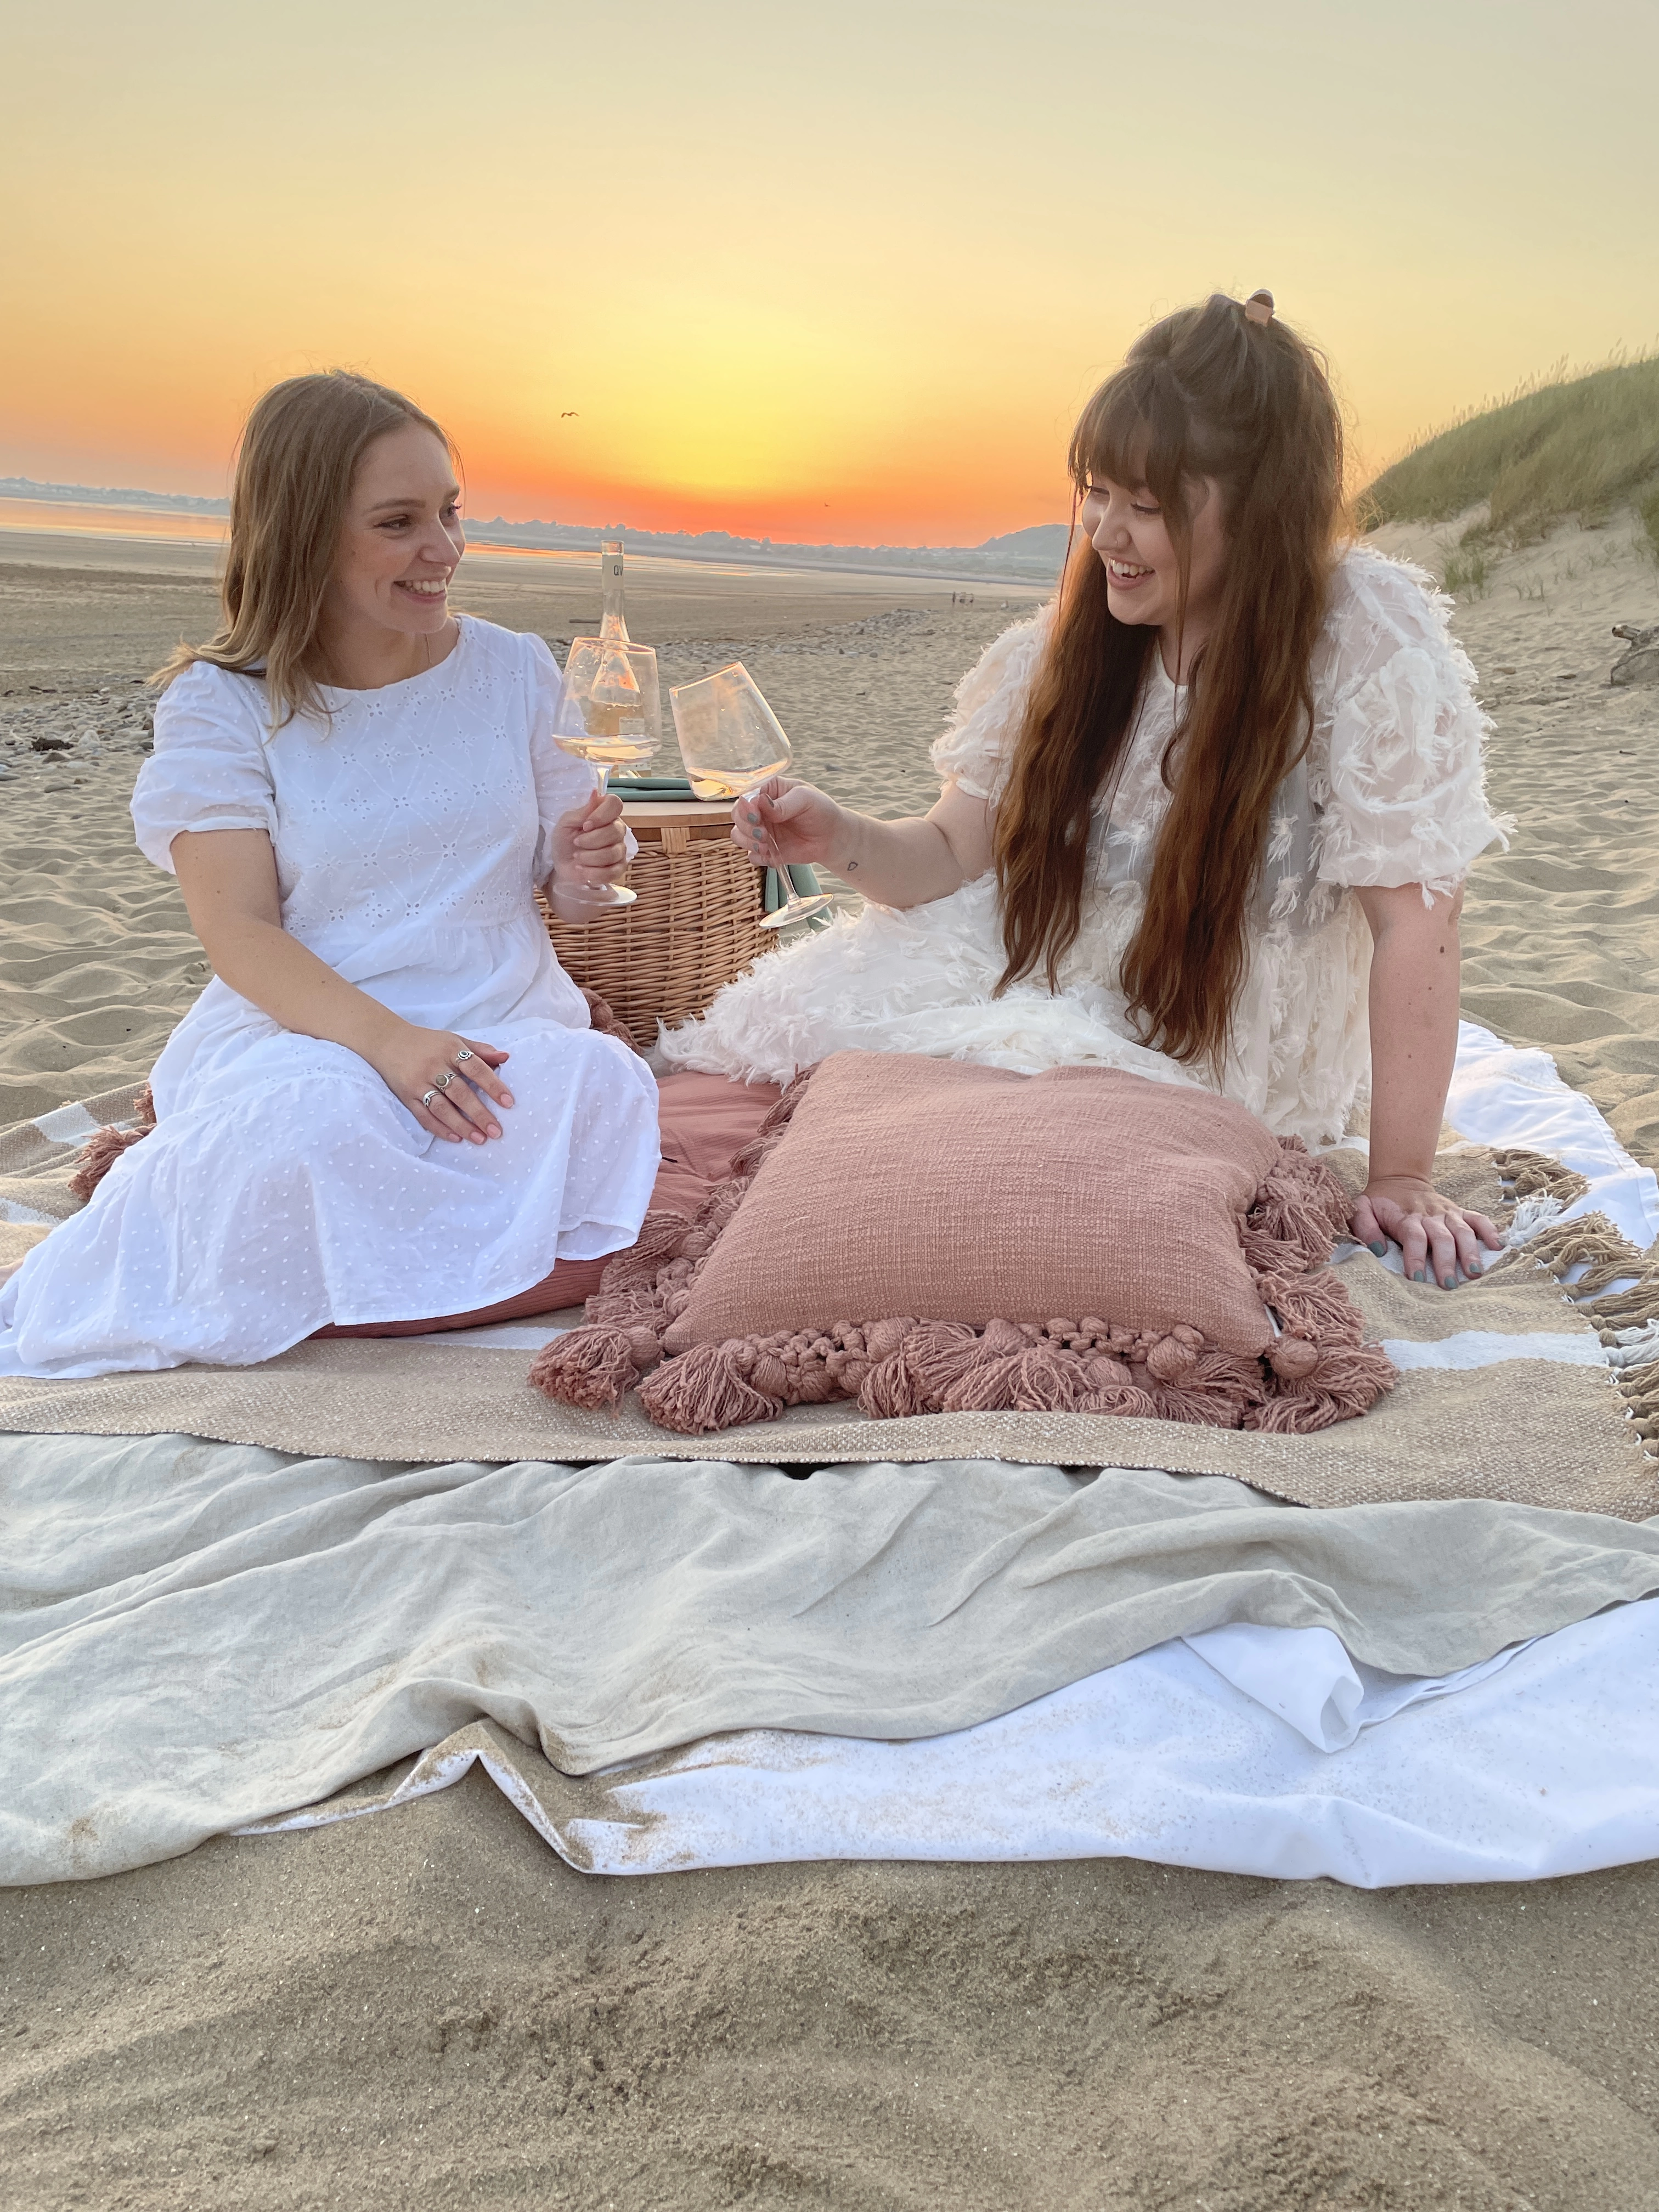 the two female founders of alex and annie studio sit on a beach with blankets and a picnic cheers'ing with glasses of wine